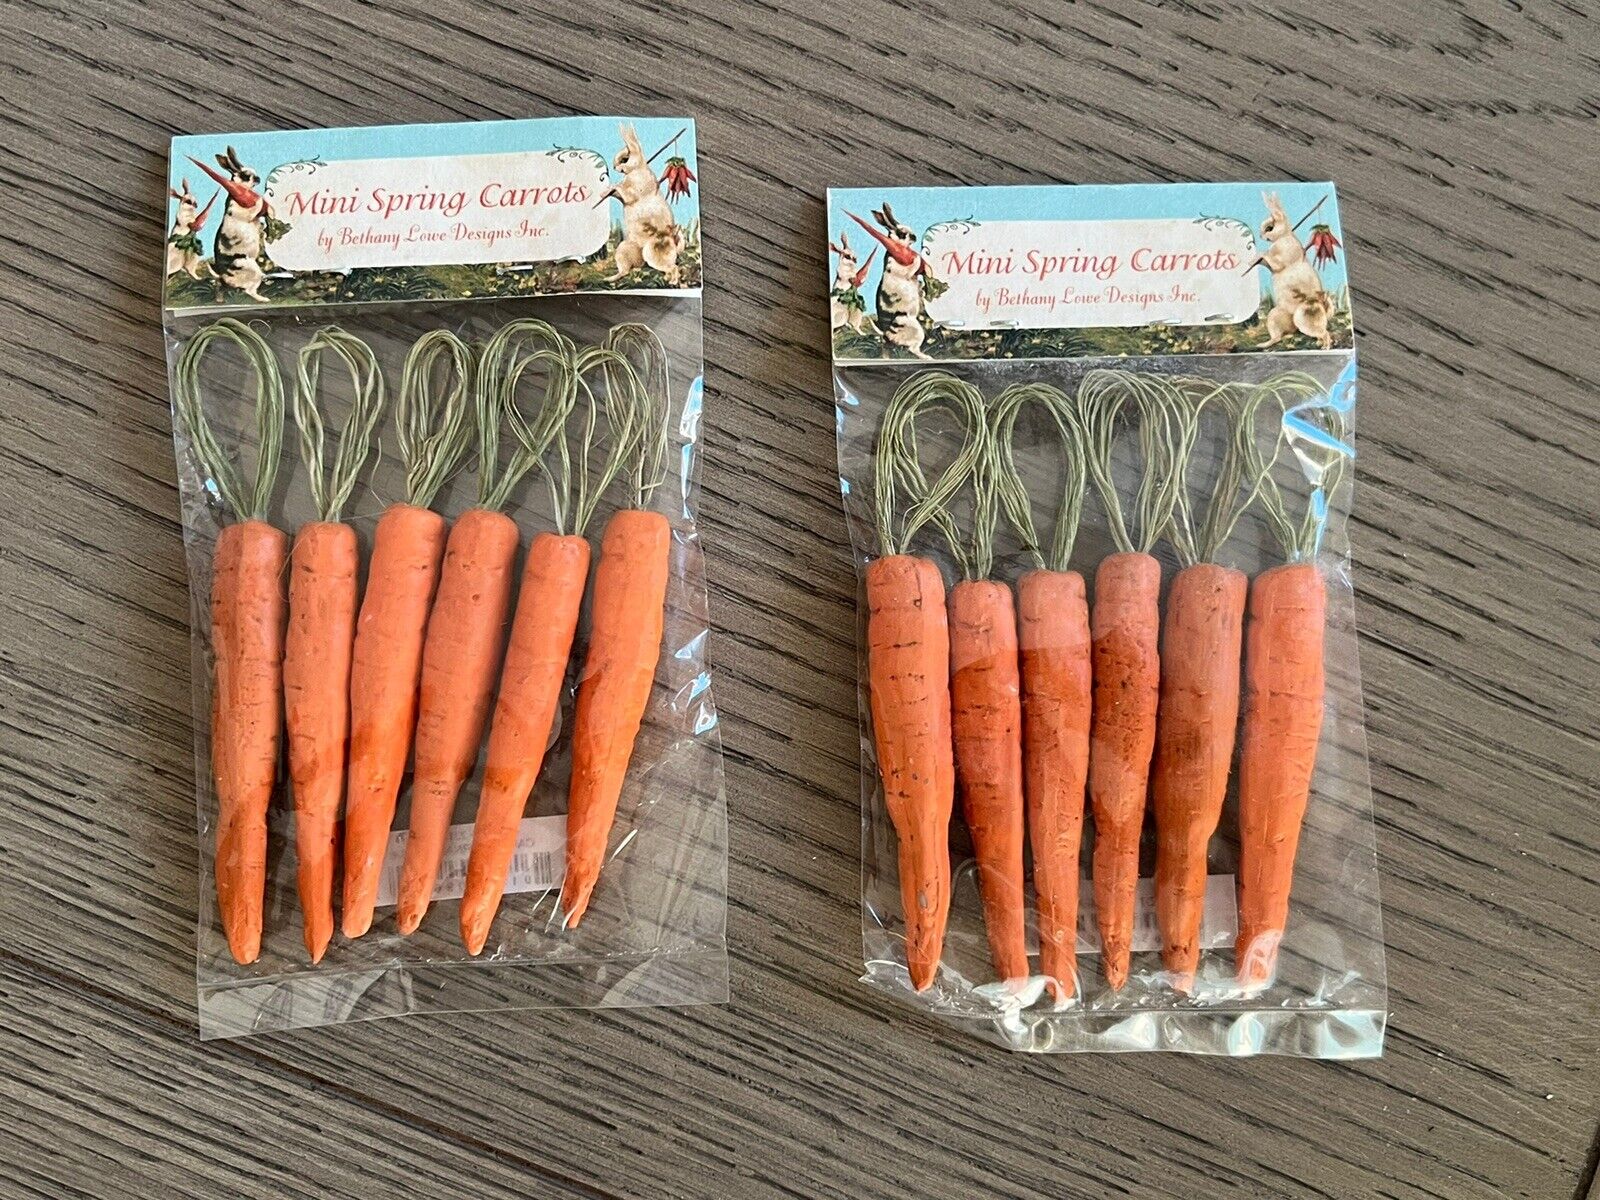 TWO New Bethany Lowe Bag Of 6 Mini Spring Carrot Ornaments TF2311 